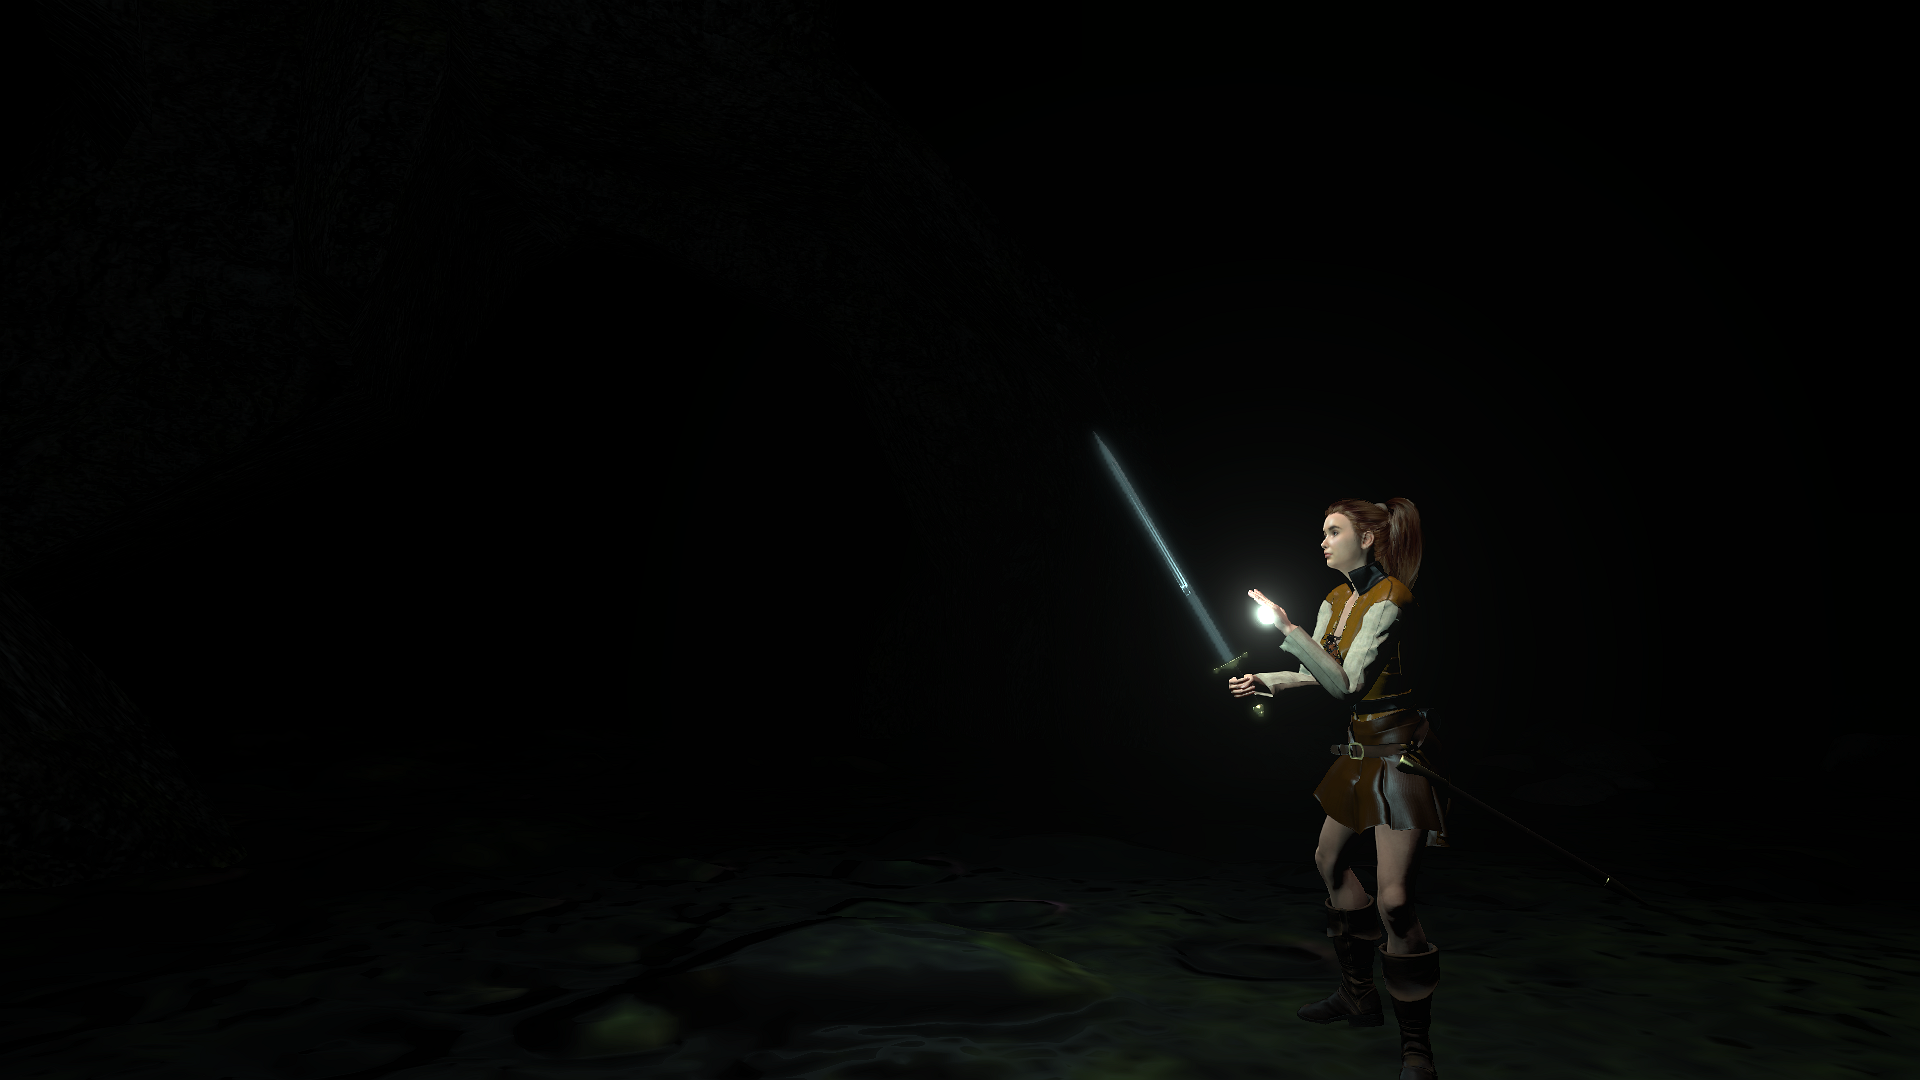 Valla in a dark cave, holding a sword, with a glowing energy in the palm of her hand